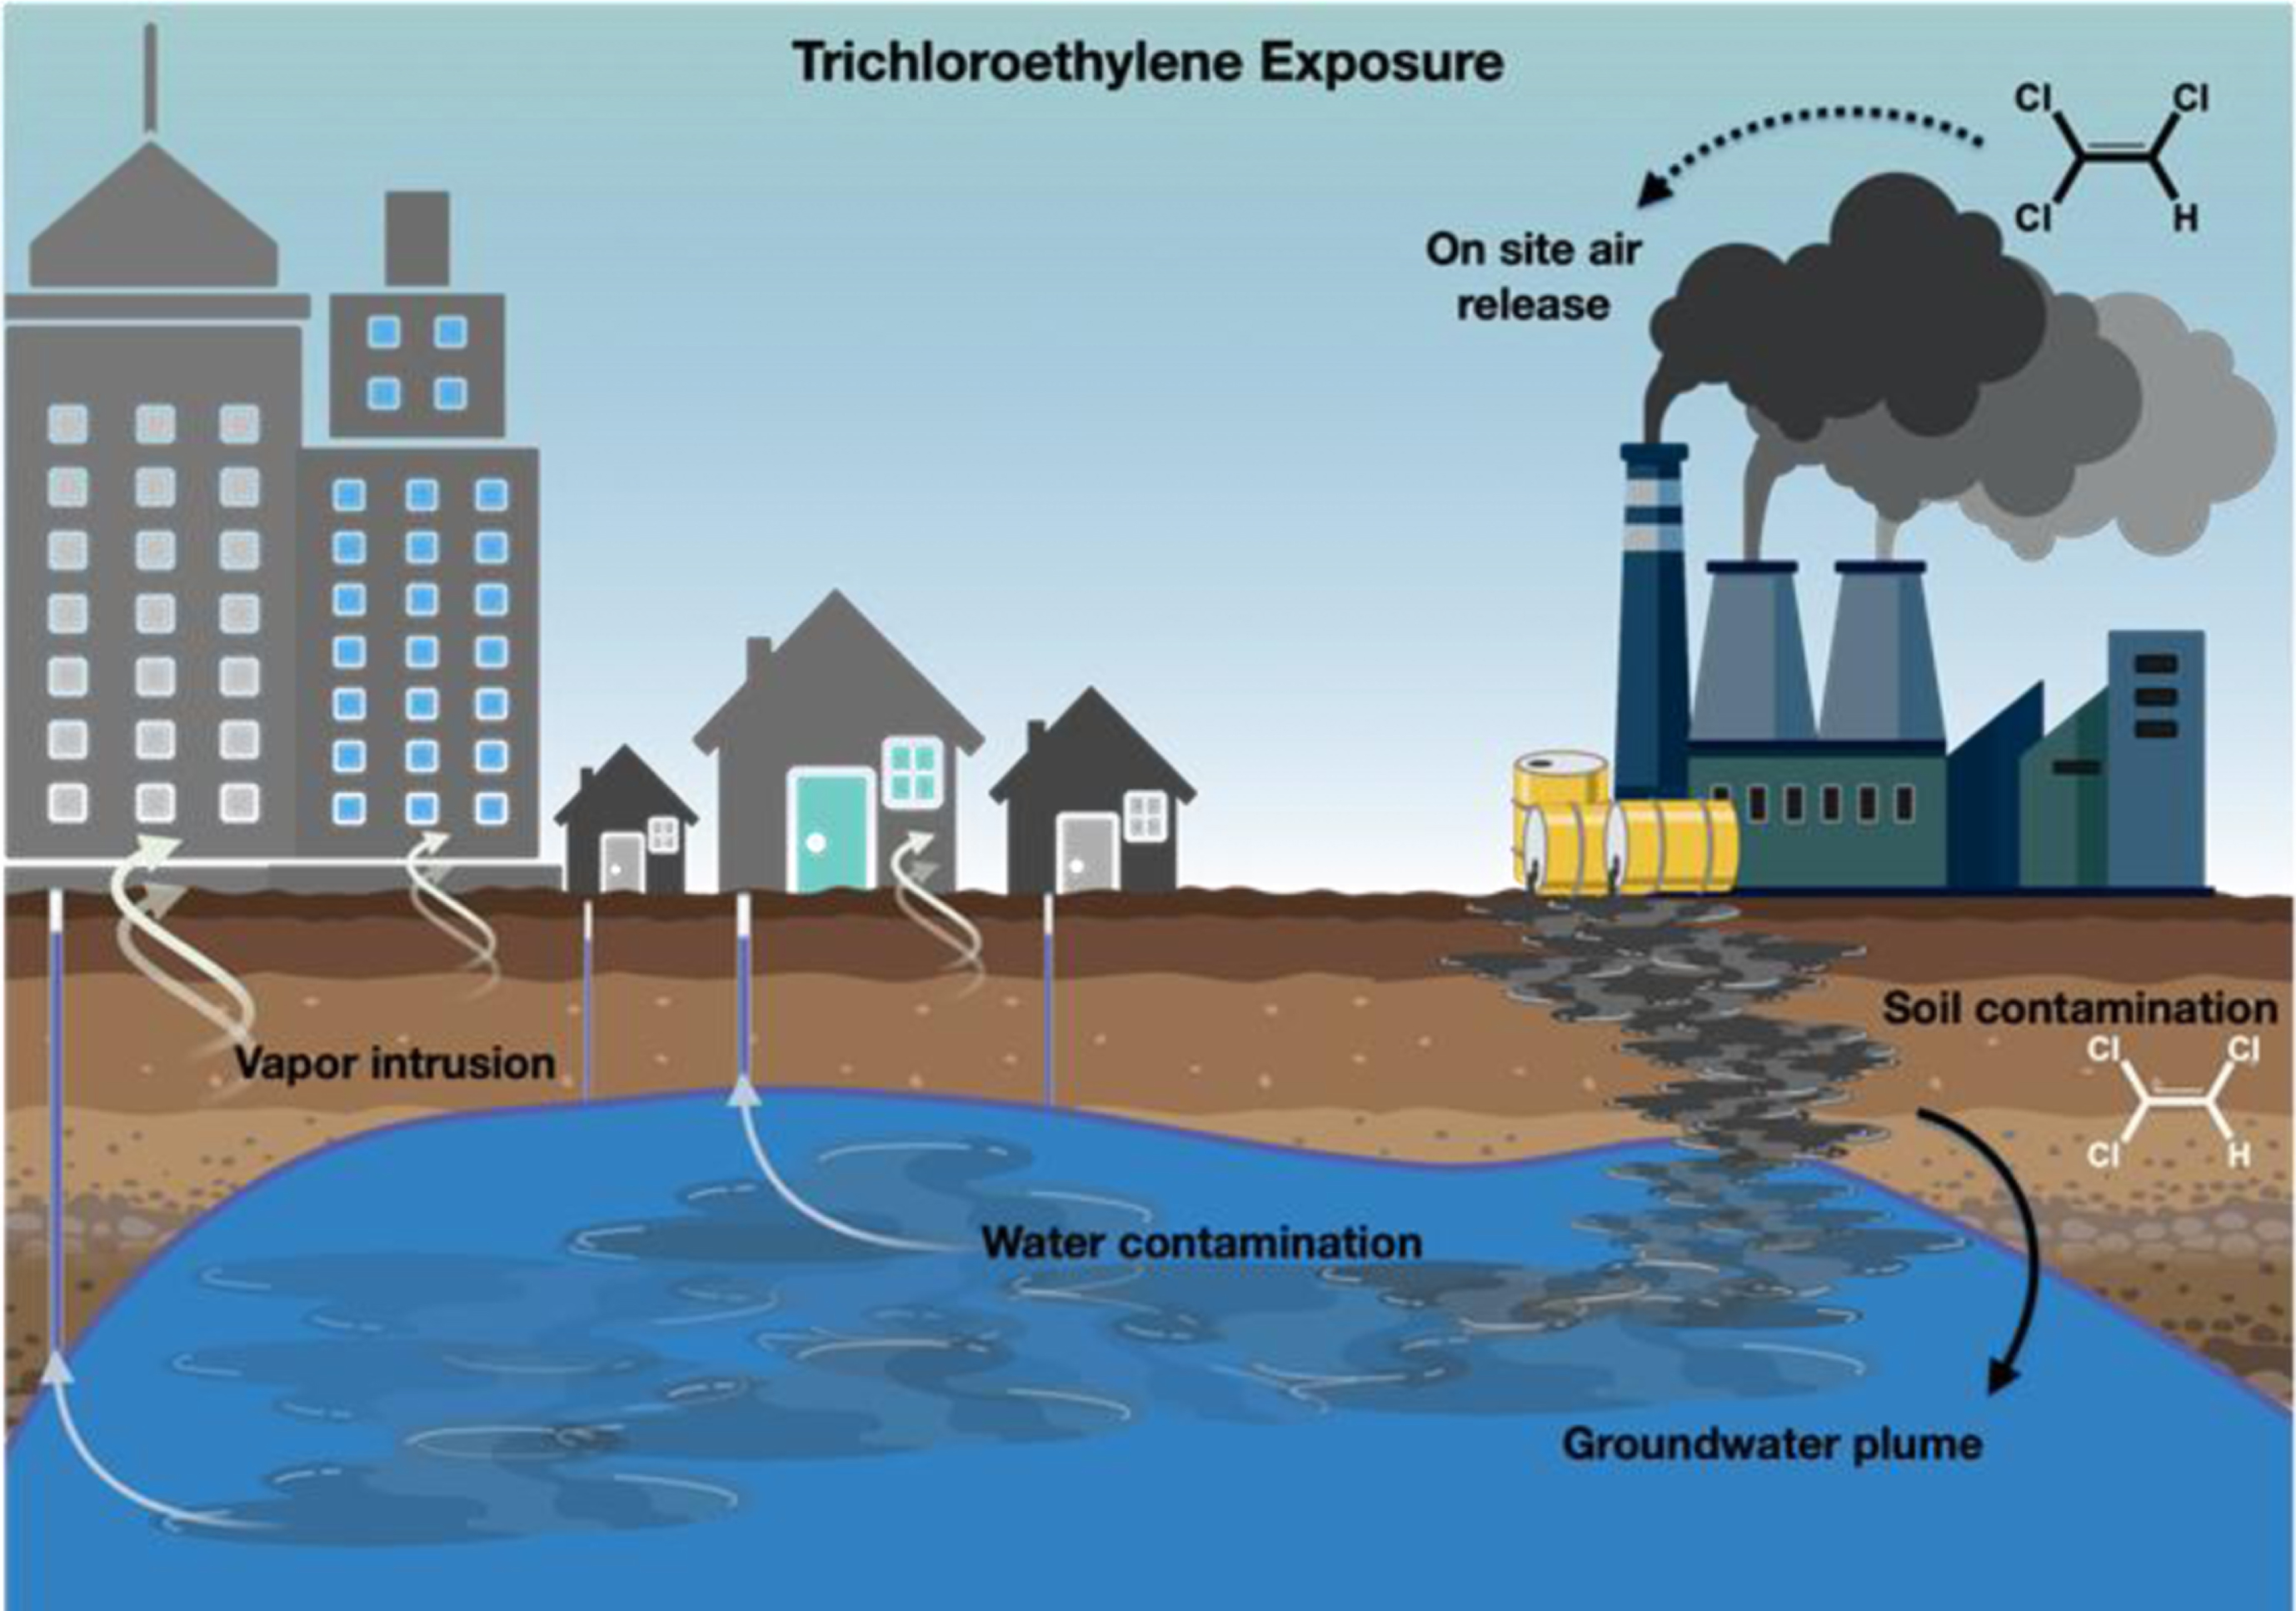 Possible modes of exposure to trichloroethylene in the environment.